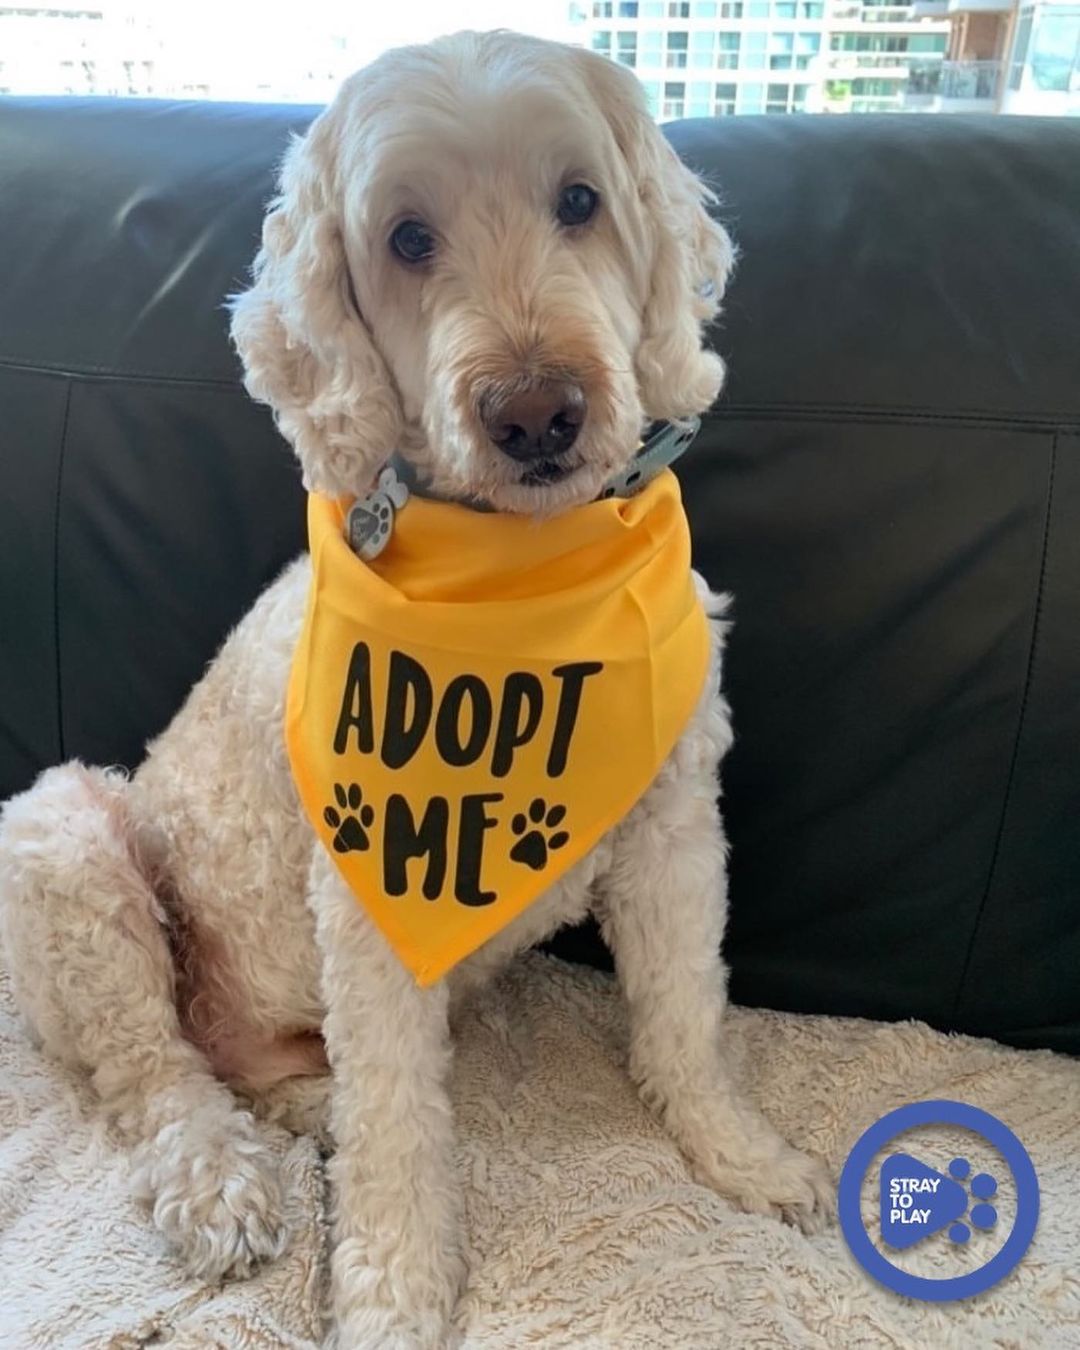 Sammy would like to let you know that November is <a target='_blank' href='https://www.instagram.com/explore/tags/adoptaseniorpetmonth/'>#adoptaseniorpetmonth</a> and he’s still waiting to find his forever home. While age is just a number, Sammy’s 13th birthday is also coming up at the end of the month. Wouldn’t it be amazing for him to celebrate his birthday with his forever family?!

Sammy’s foster mom says that you would never know he’s an older boy. She describes him as sweet, very smart and that he makes a great companion! 

His favourite hobbies include: naptime, exploring new parks, meeting new people, eating beef-flavoured treats and keeping you company while you watch TV. Talk about too good to be true!

To find out more about Sammy, or apply to adopt, click the link in our bio to visit our website. 

<a target='_blank' href='https://www.instagram.com/explore/tags/adoptapet/'>#adoptapet</a> <a target='_blank' href='https://www.instagram.com/explore/tags/opttoadopt/'>#opttoadopt</a> <a target='_blank' href='https://www.instagram.com/explore/tags/adoptdontshop/'>#adoptdontshop</a> <a target='_blank' href='https://www.instagram.com/explore/tags/straytoplay/'>#straytoplay</a> <a target='_blank' href='https://www.instagram.com/explore/tags/rescuedog/'>#rescuedog</a> <a target='_blank' href='https://www.instagram.com/explore/tags/torontodogs/'>#torontodogs</a> <a target='_blank' href='https://www.instagram.com/explore/tags/ontariorescuedogs/'>#ontariorescuedogs</a> <a target='_blank' href='https://www.instagram.com/explore/tags/seniordog/'>#seniordog</a>